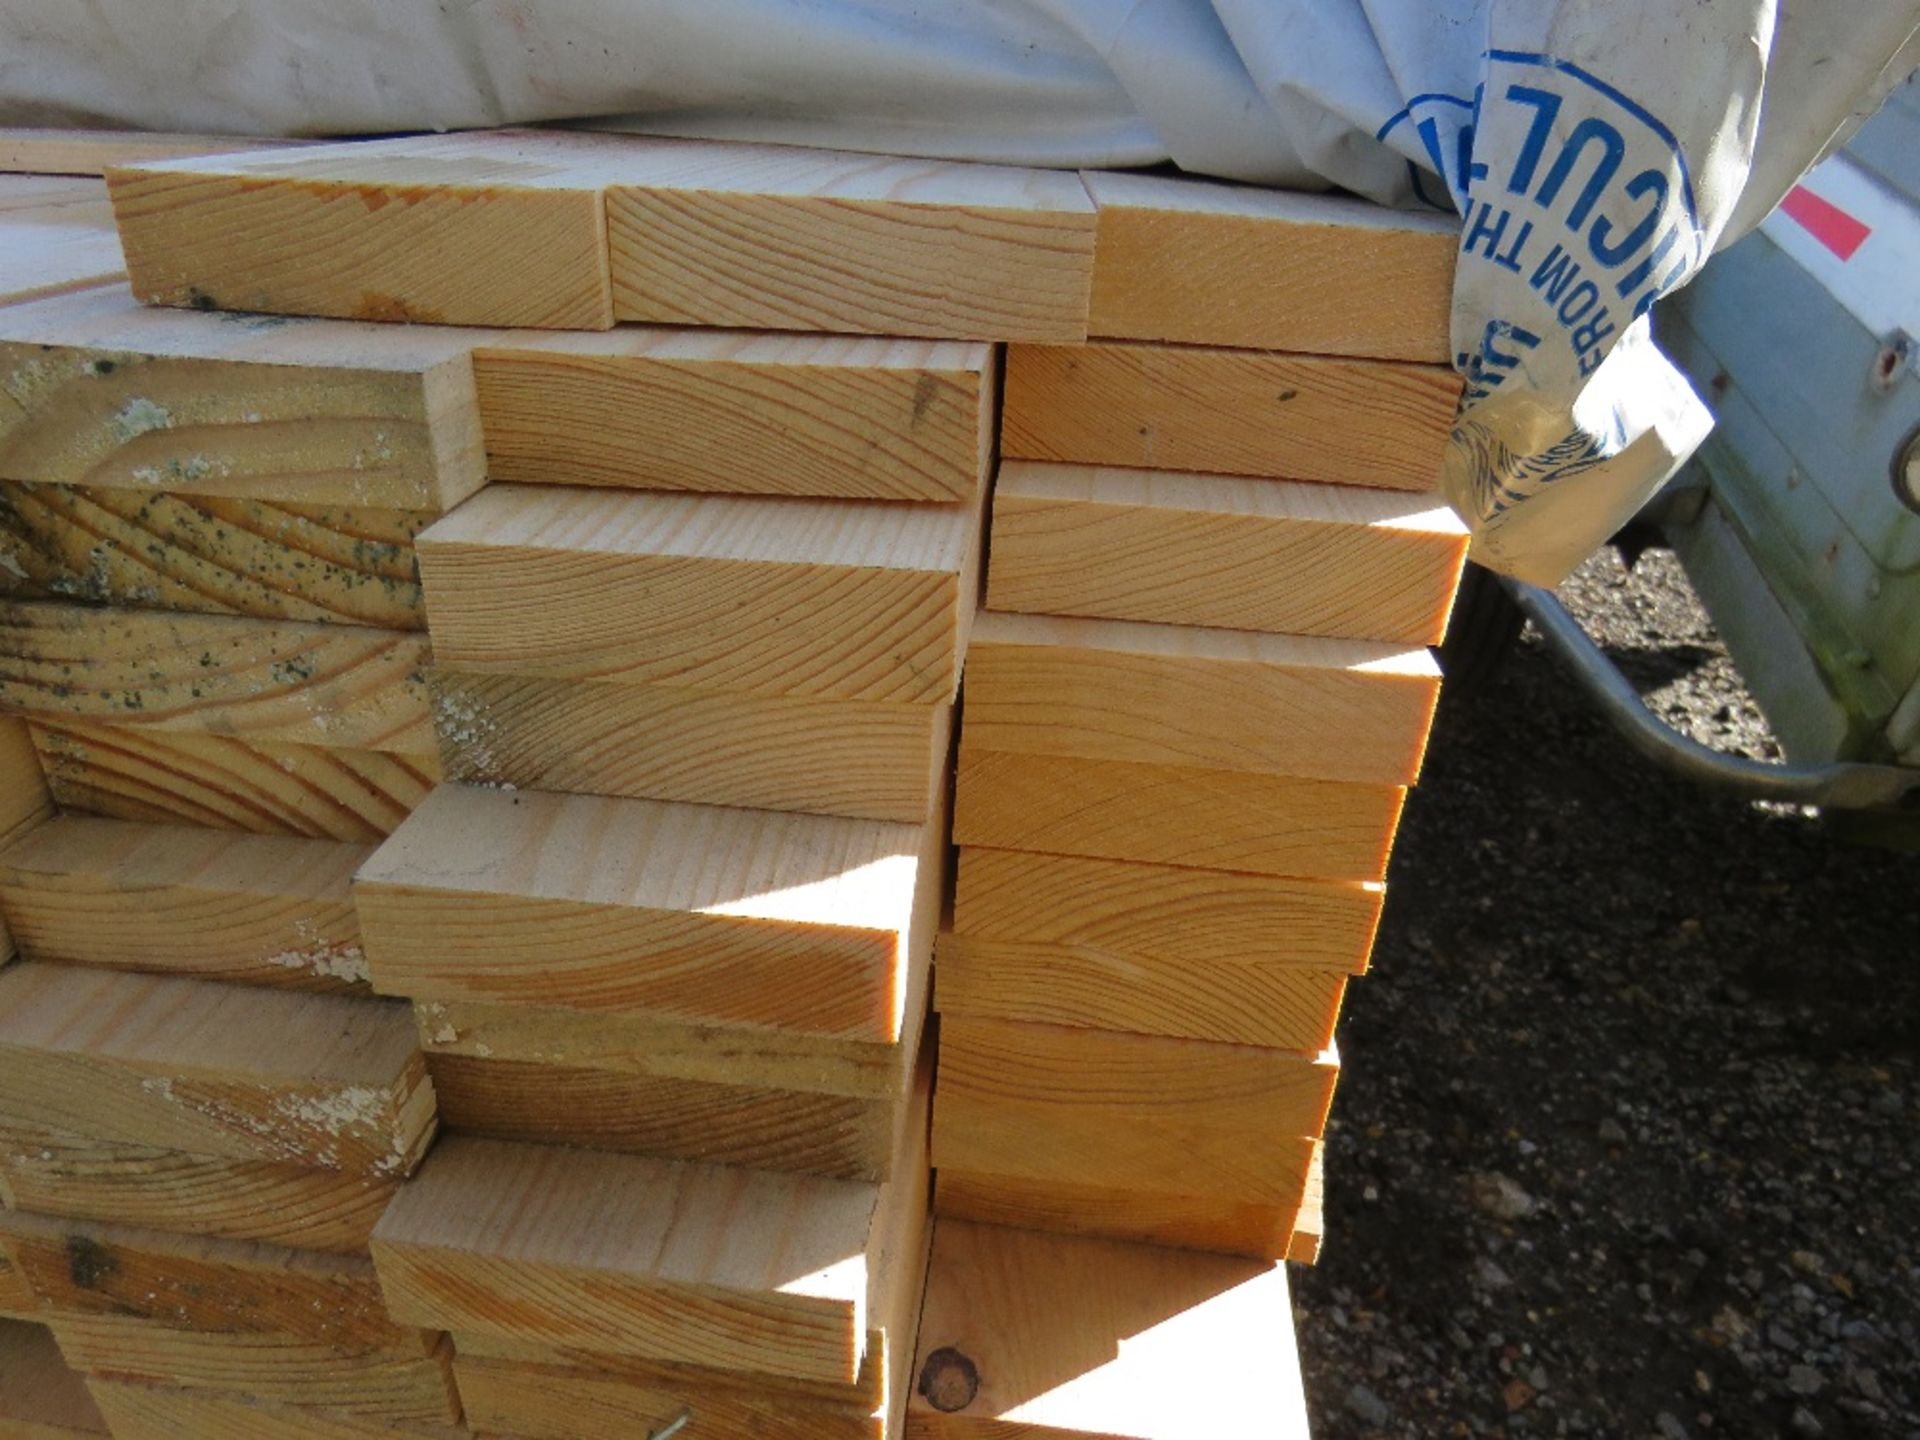 PACK OF TIMBER SLATS / BOARDS, UNTREATED. SIZE: 1.8M LENGTH X 70MM WIDE X 20MM DEPTH APPROX. - Image 2 of 4